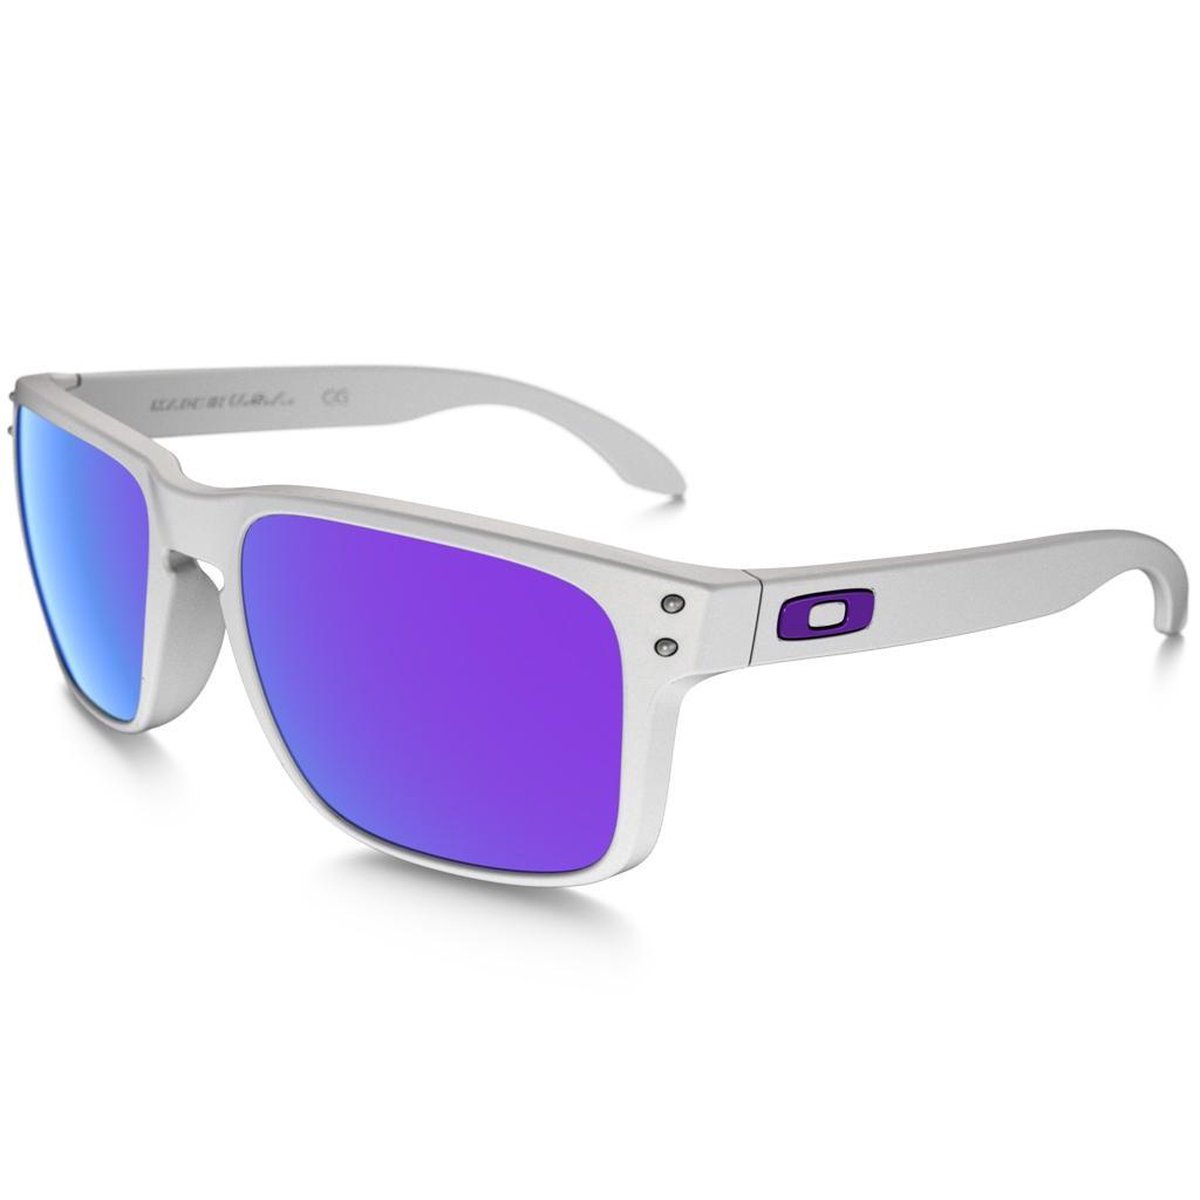 snijder kant Acquiesce Oakley HOLBROOK OO9102 9102 05 - Zonnebril - Wit/ Paars - 55 mm | bol.com